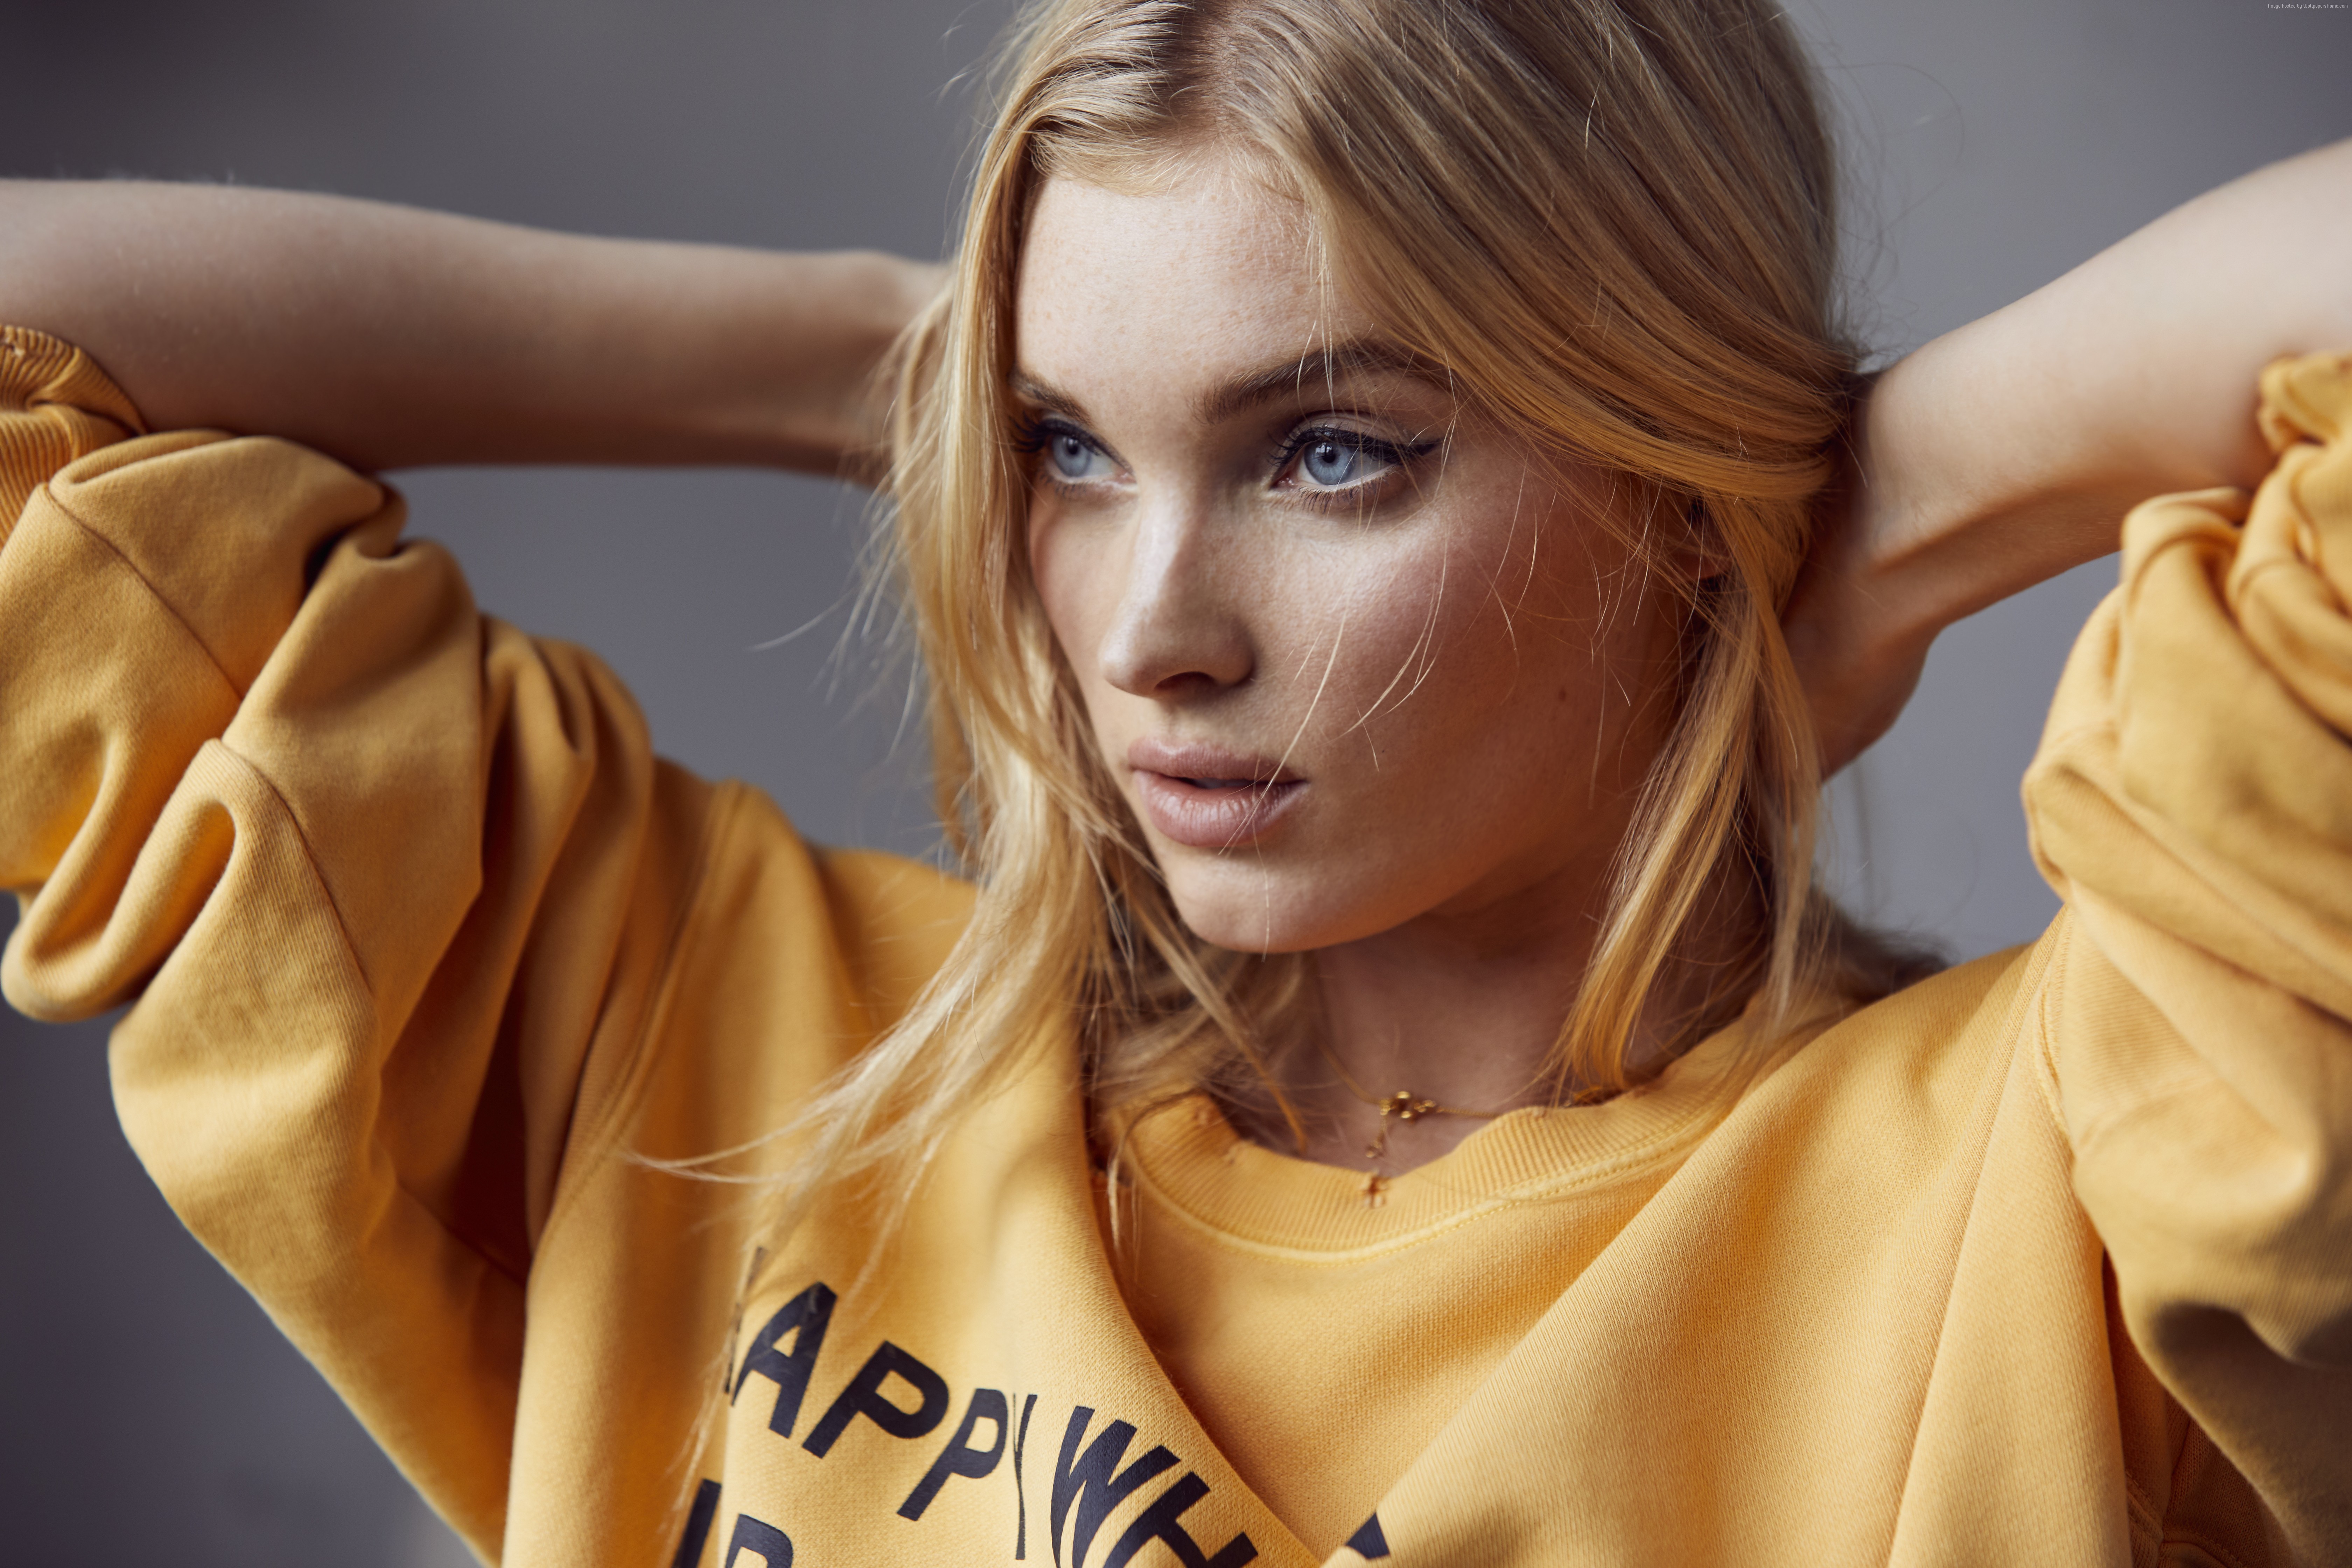 Beautiful pictures of Elsa Hosk, model, girls for free